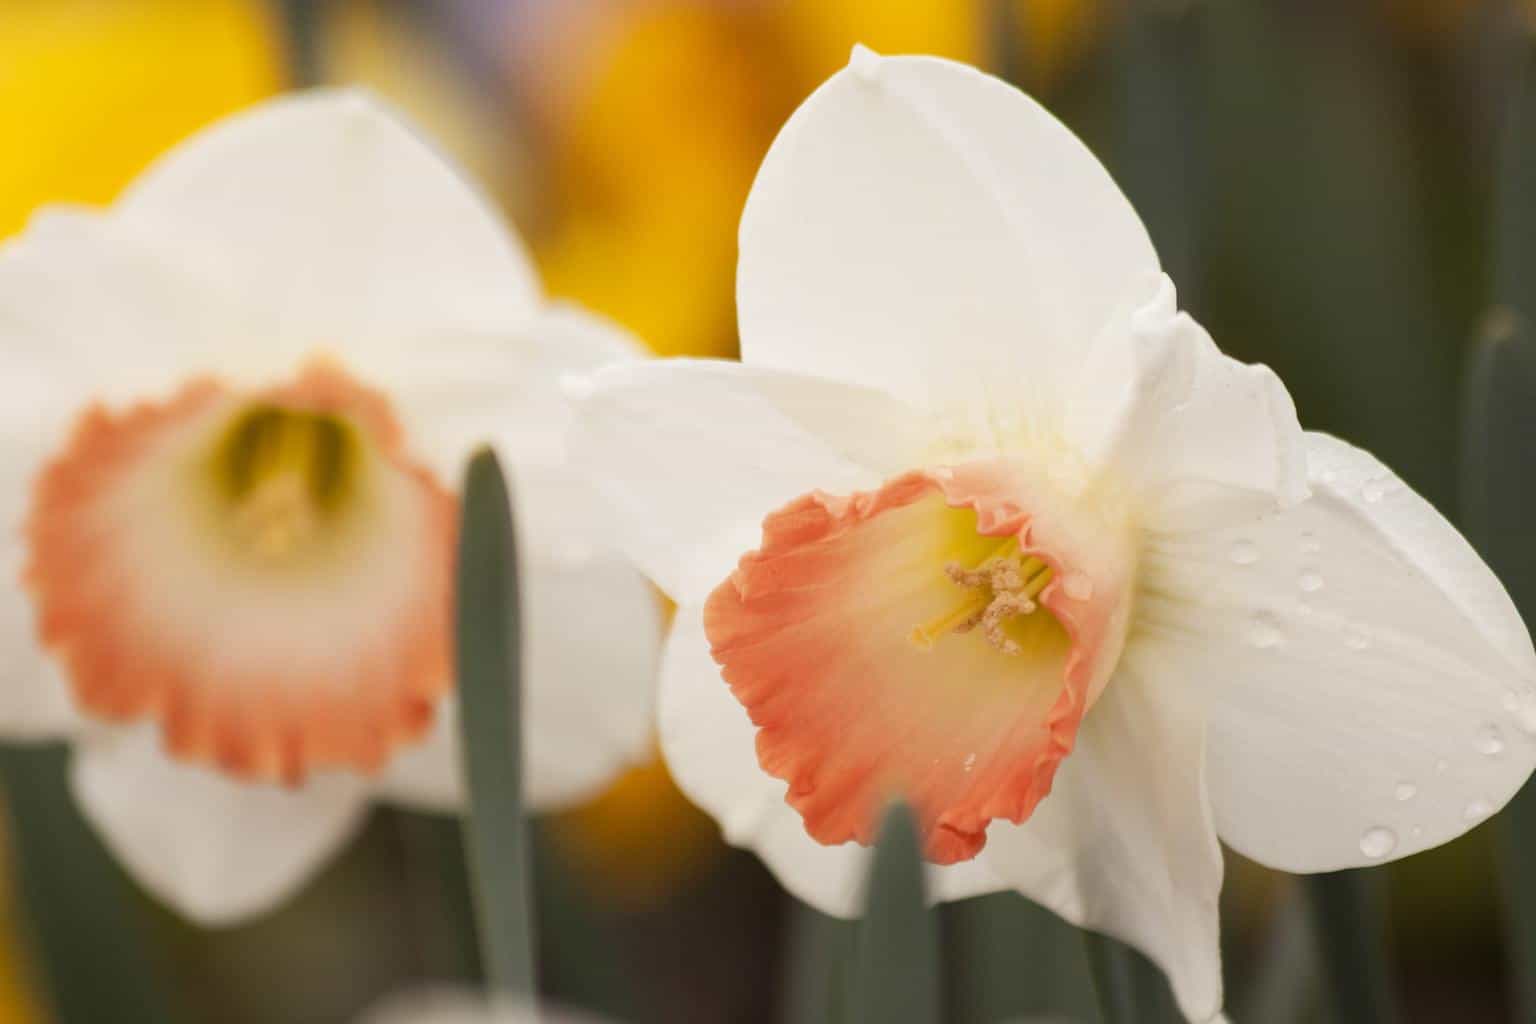 Everything You Need to Know About Daffodils